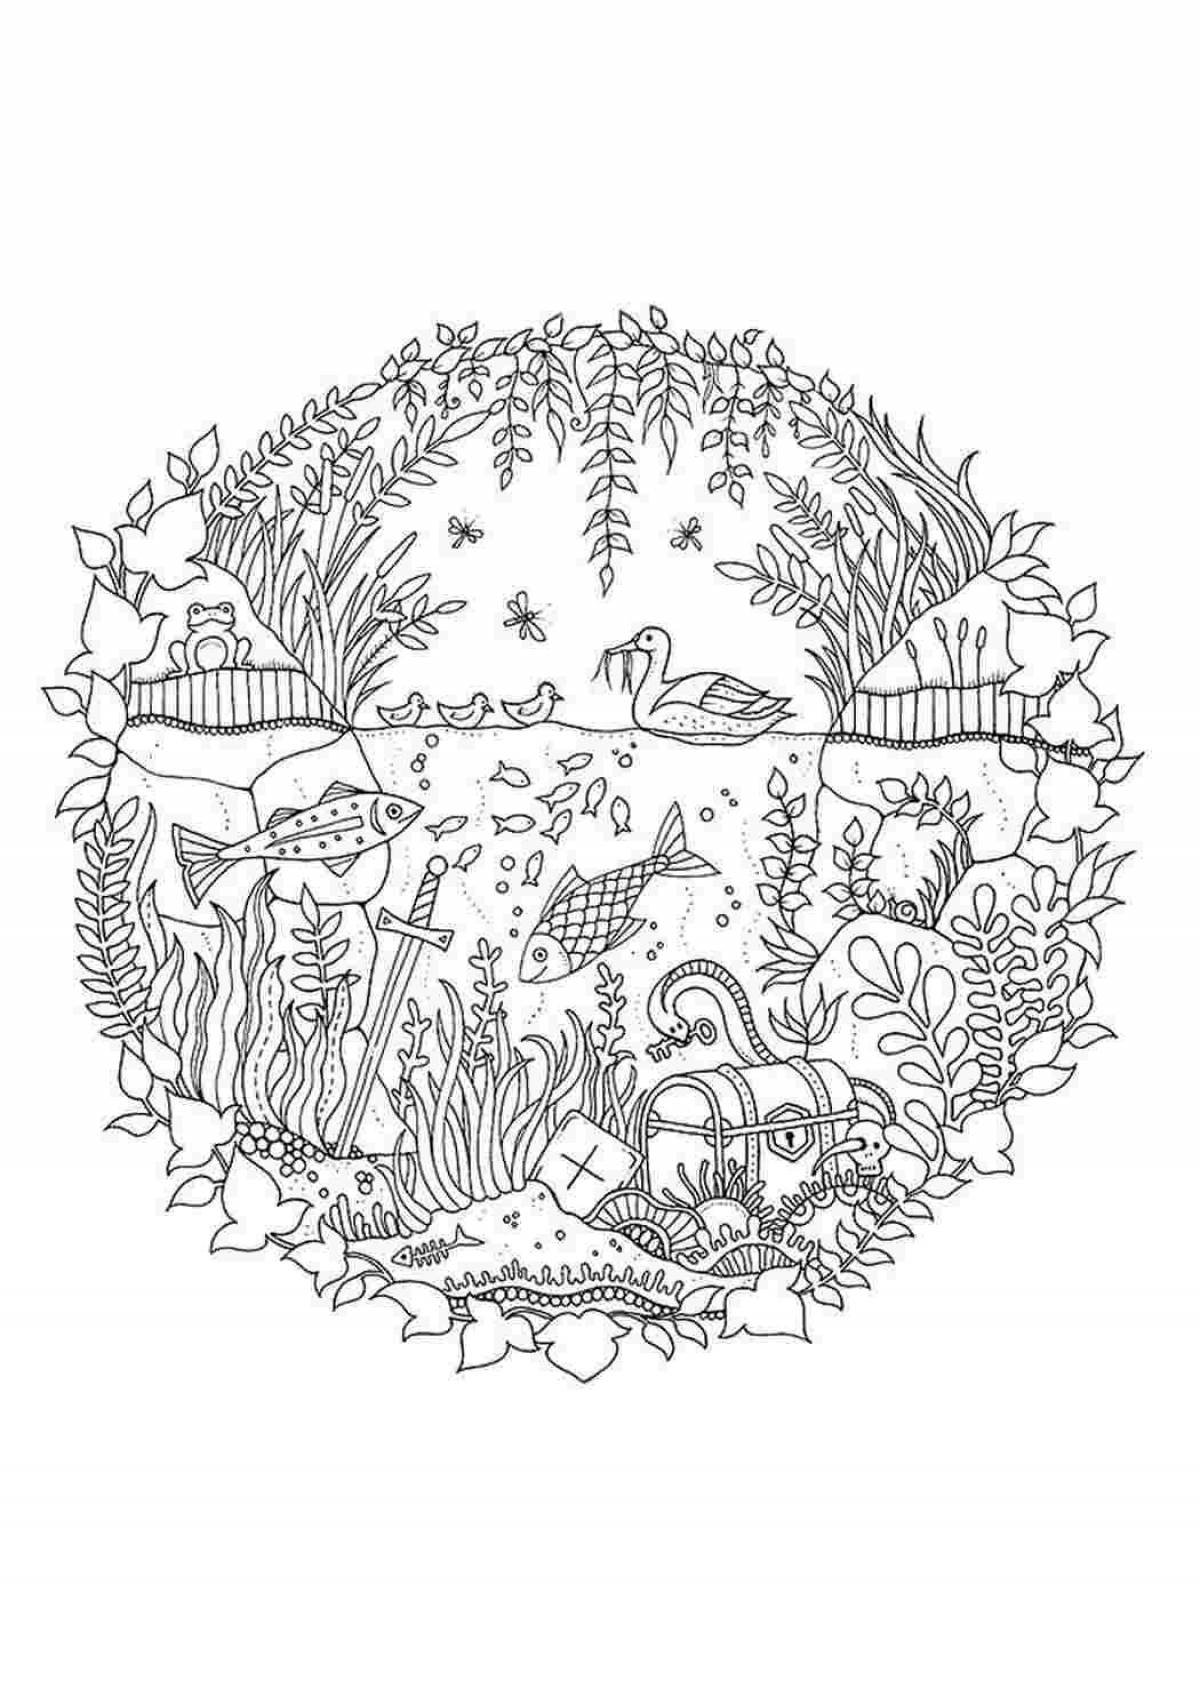 Charming antistress forest coloring book